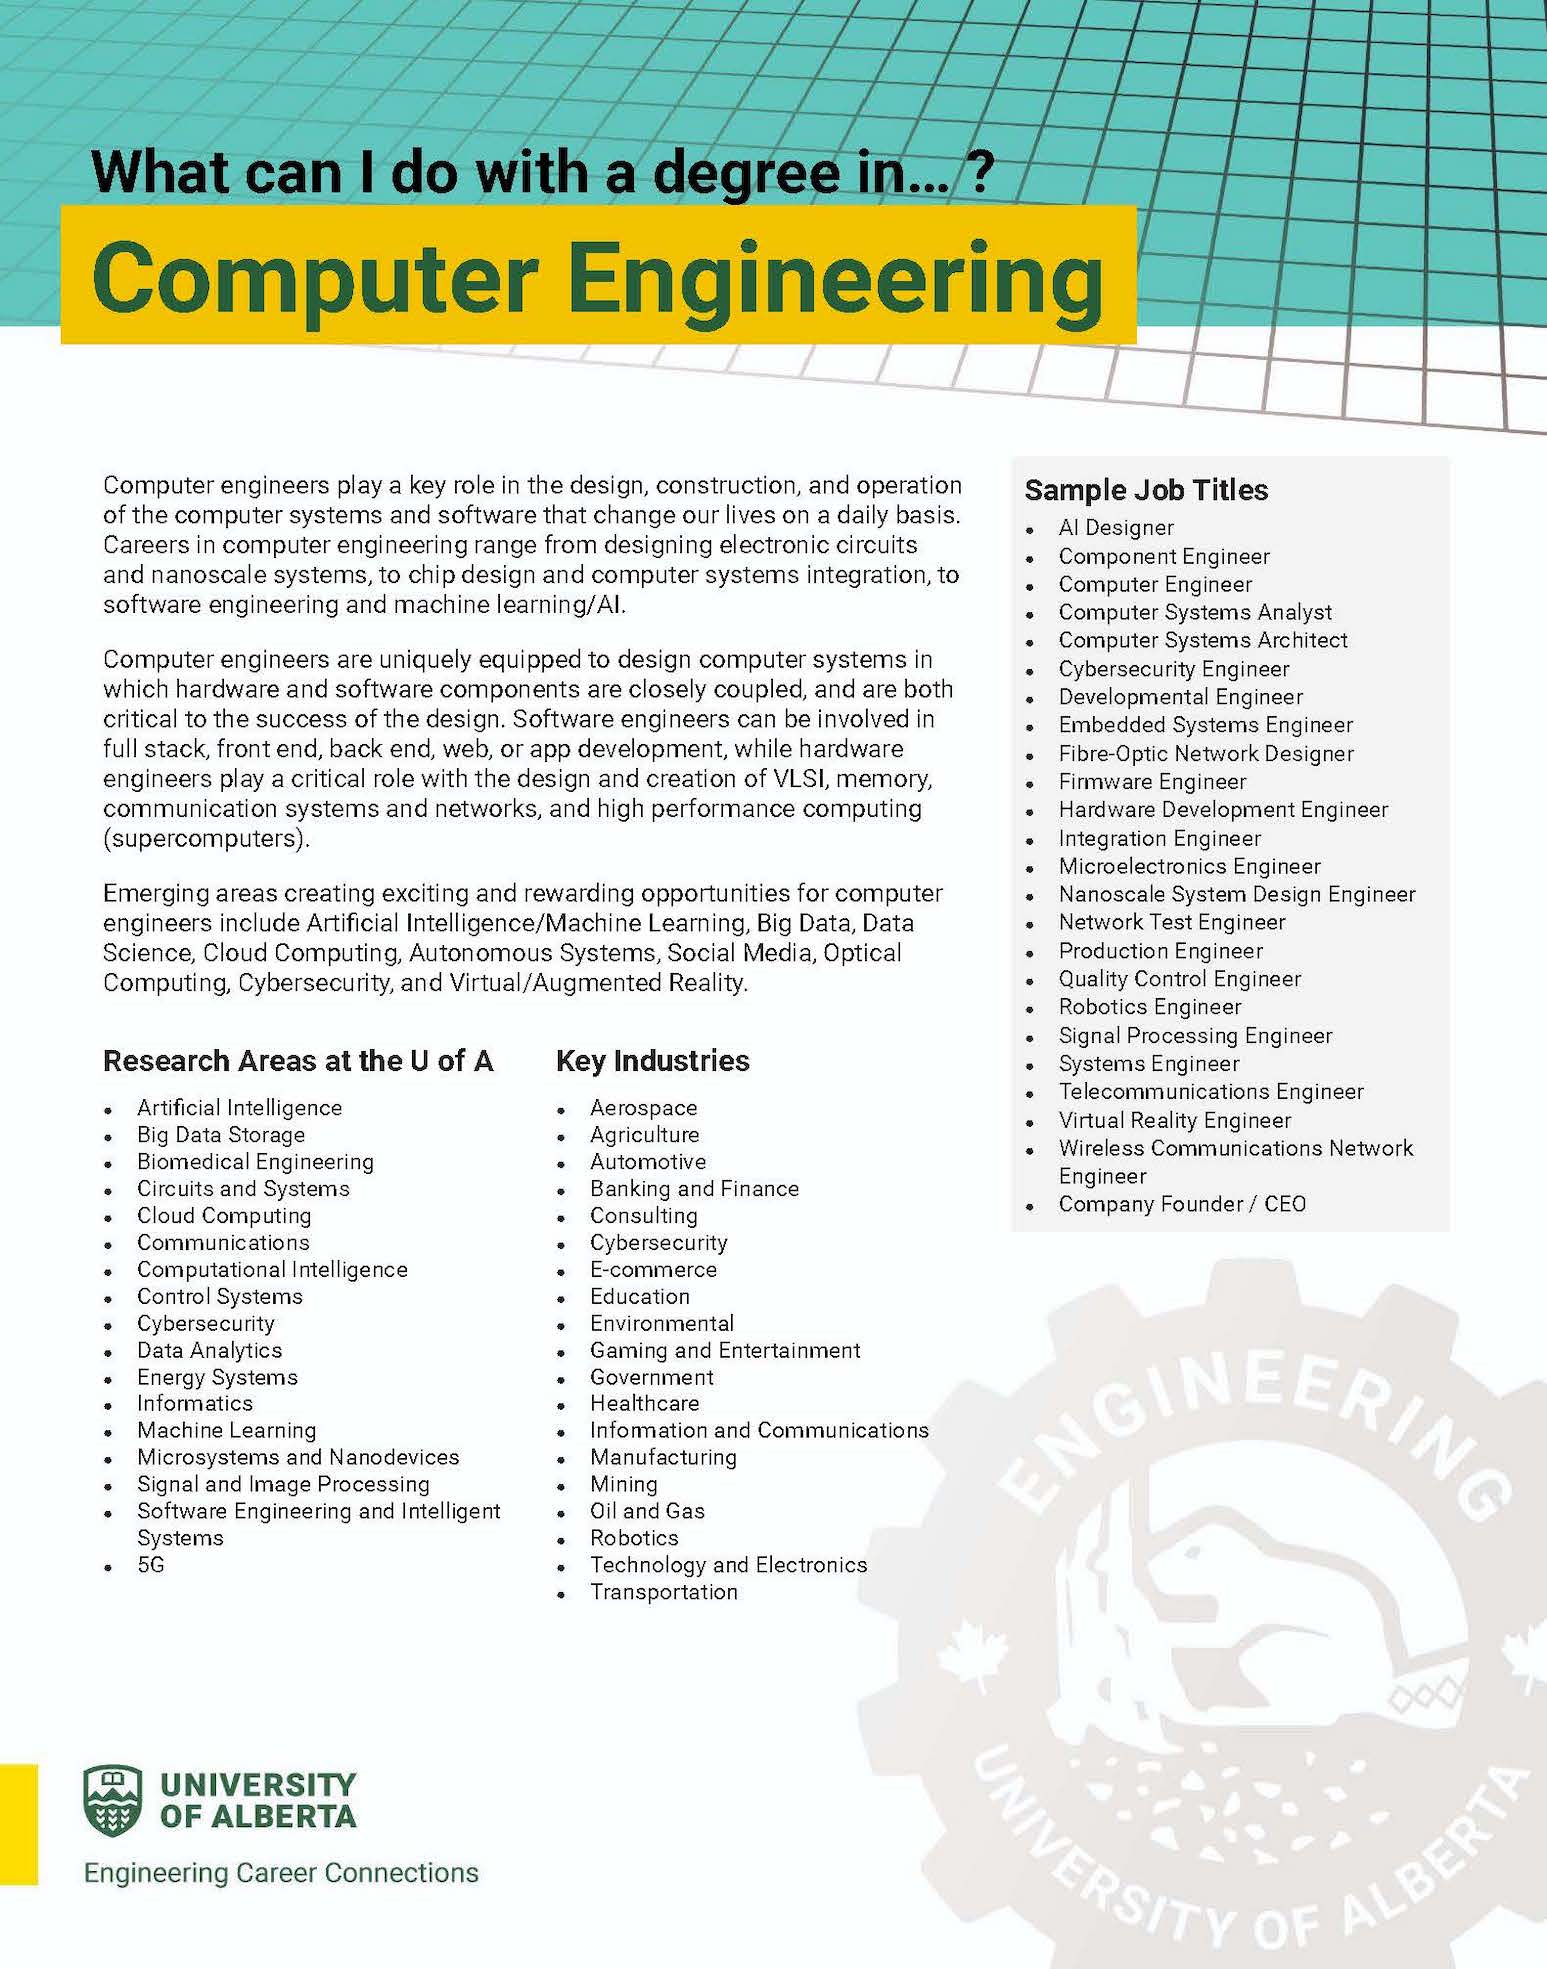 Screenshot of the "What Can I Do With A Degree in Computer Engineering?” Handout. The image links to the handout.